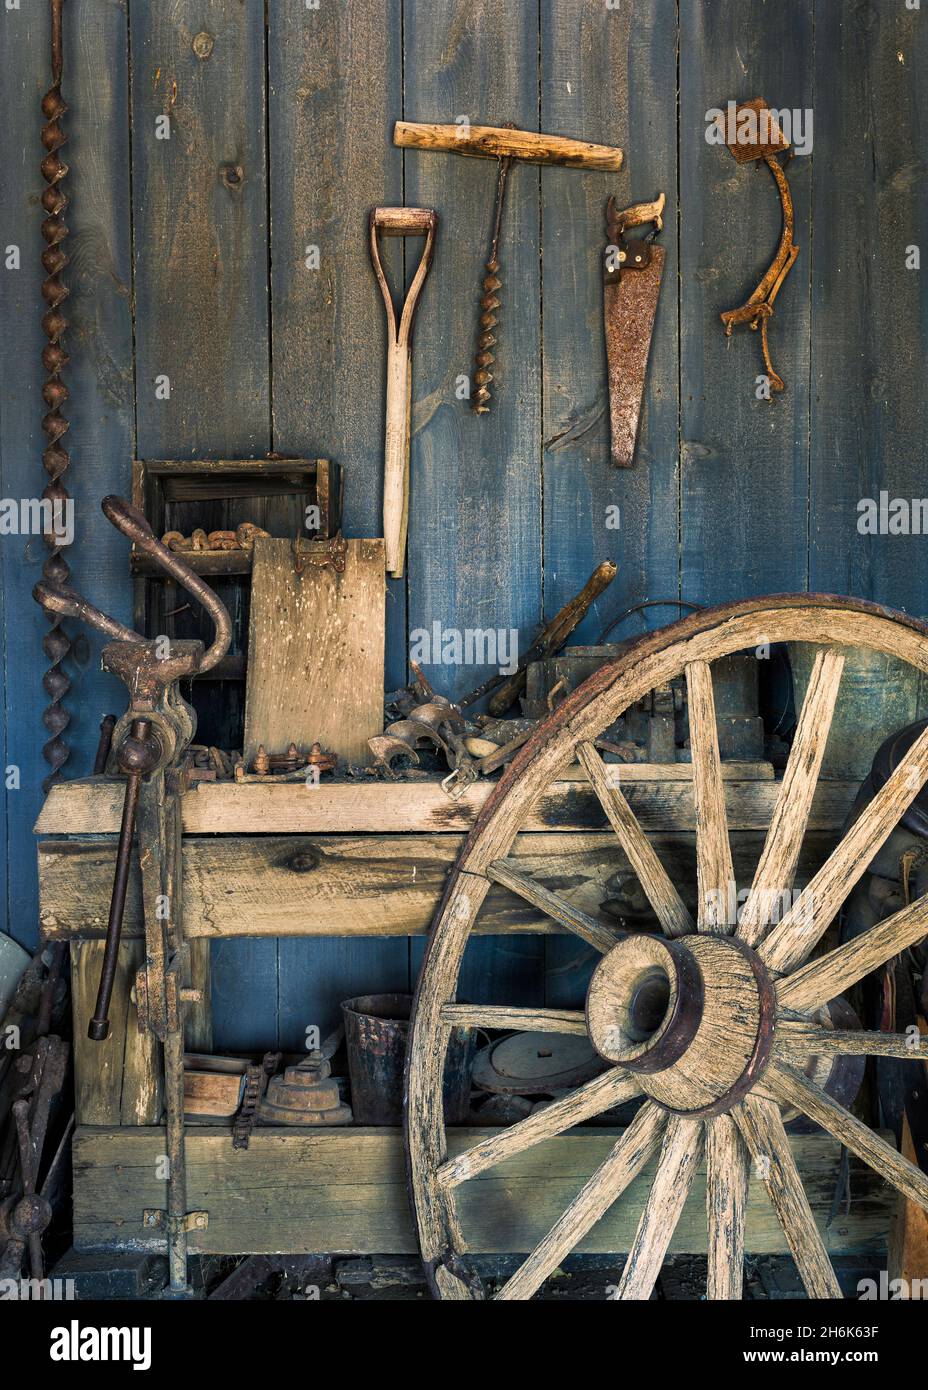 Old wooden wagon wheel against work bench in blacksmith repair shop Stock Photo